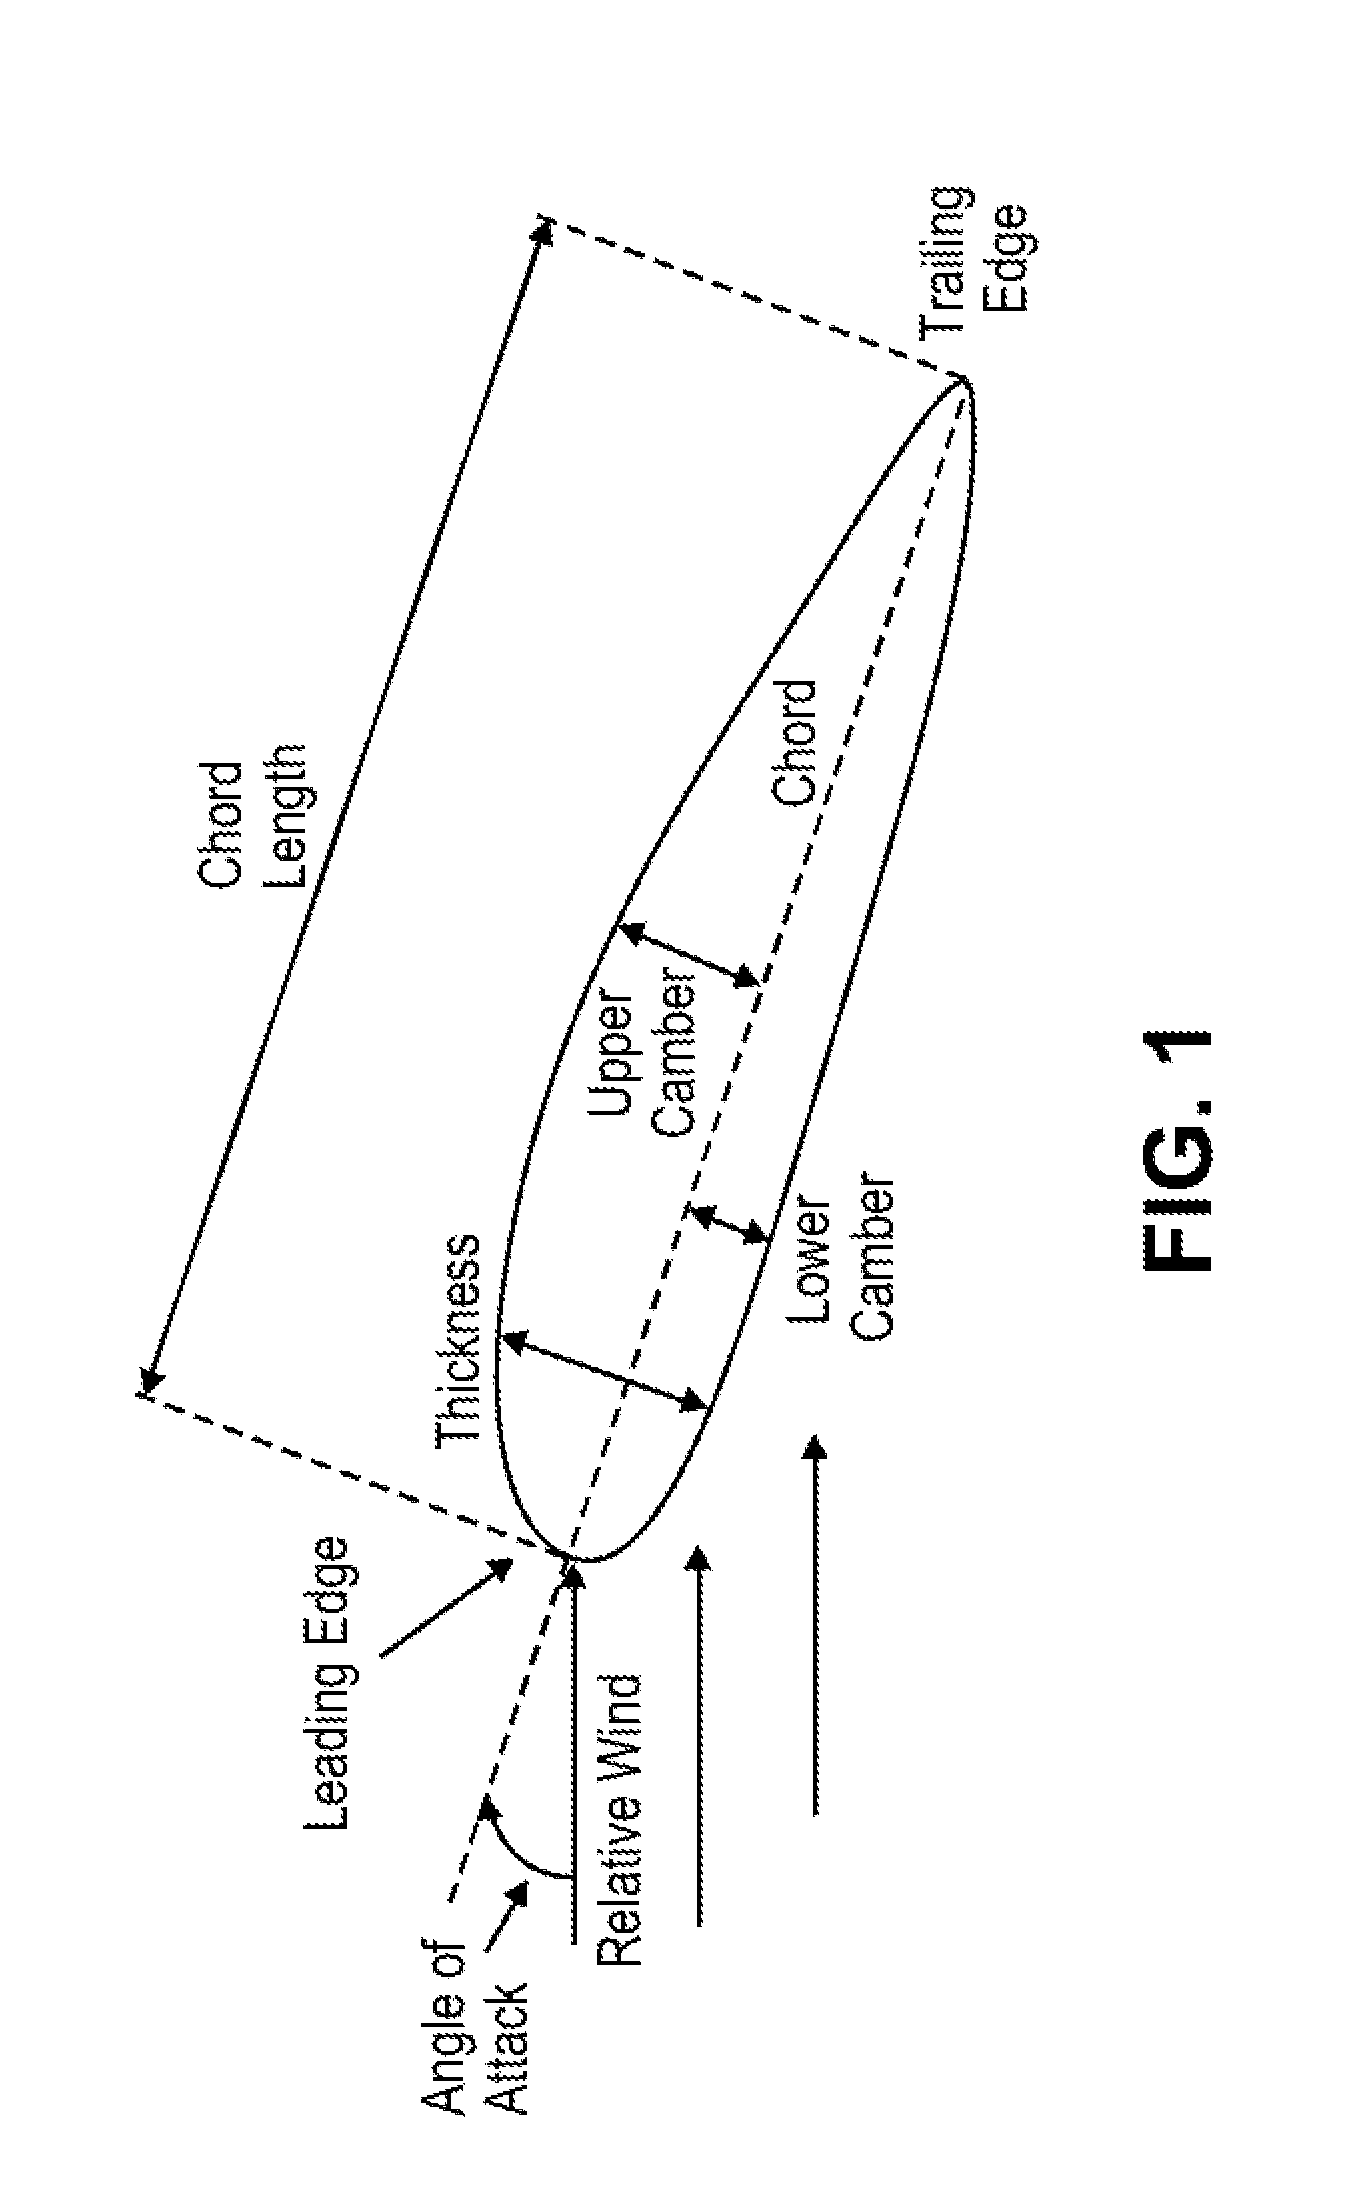 Turbine blades, systems and methods